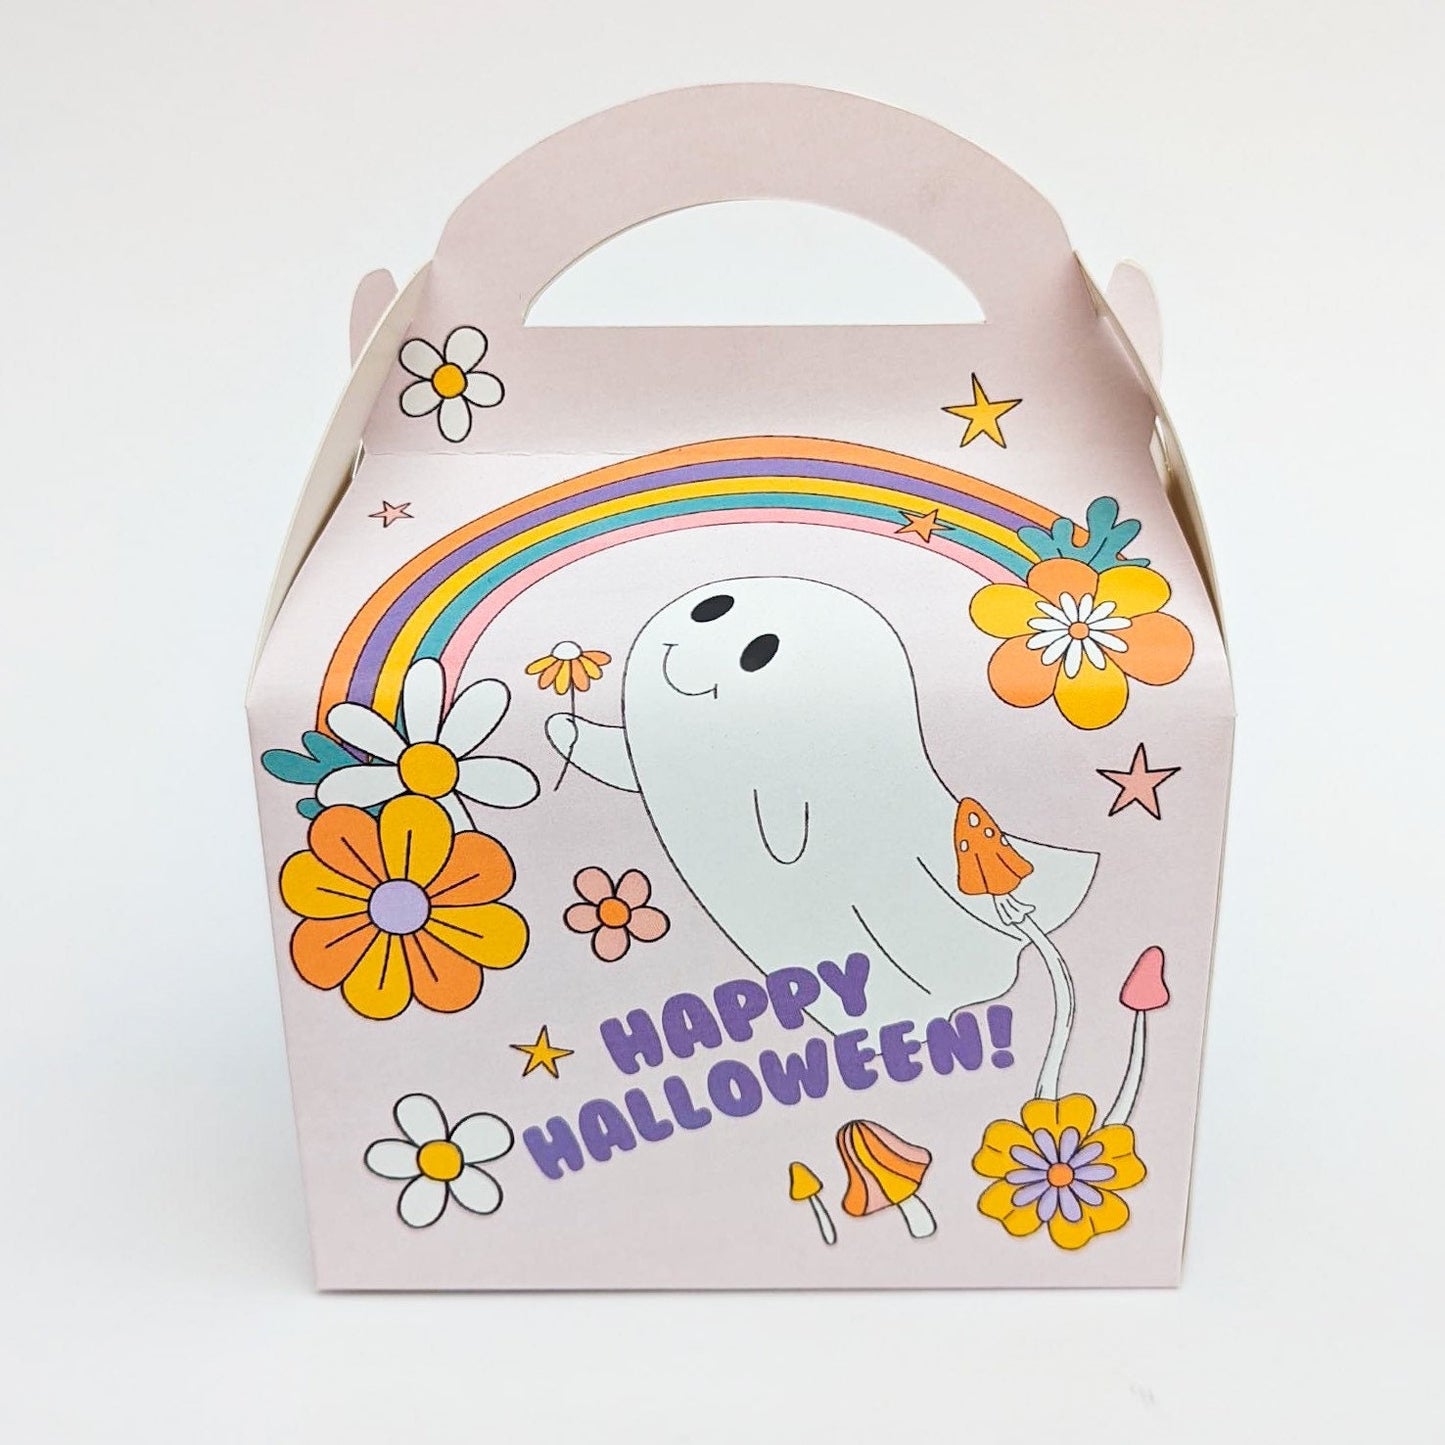 HALLOWEEN Hippie cute watercolor Personalised Children’s Party Box Gift Bag Favour